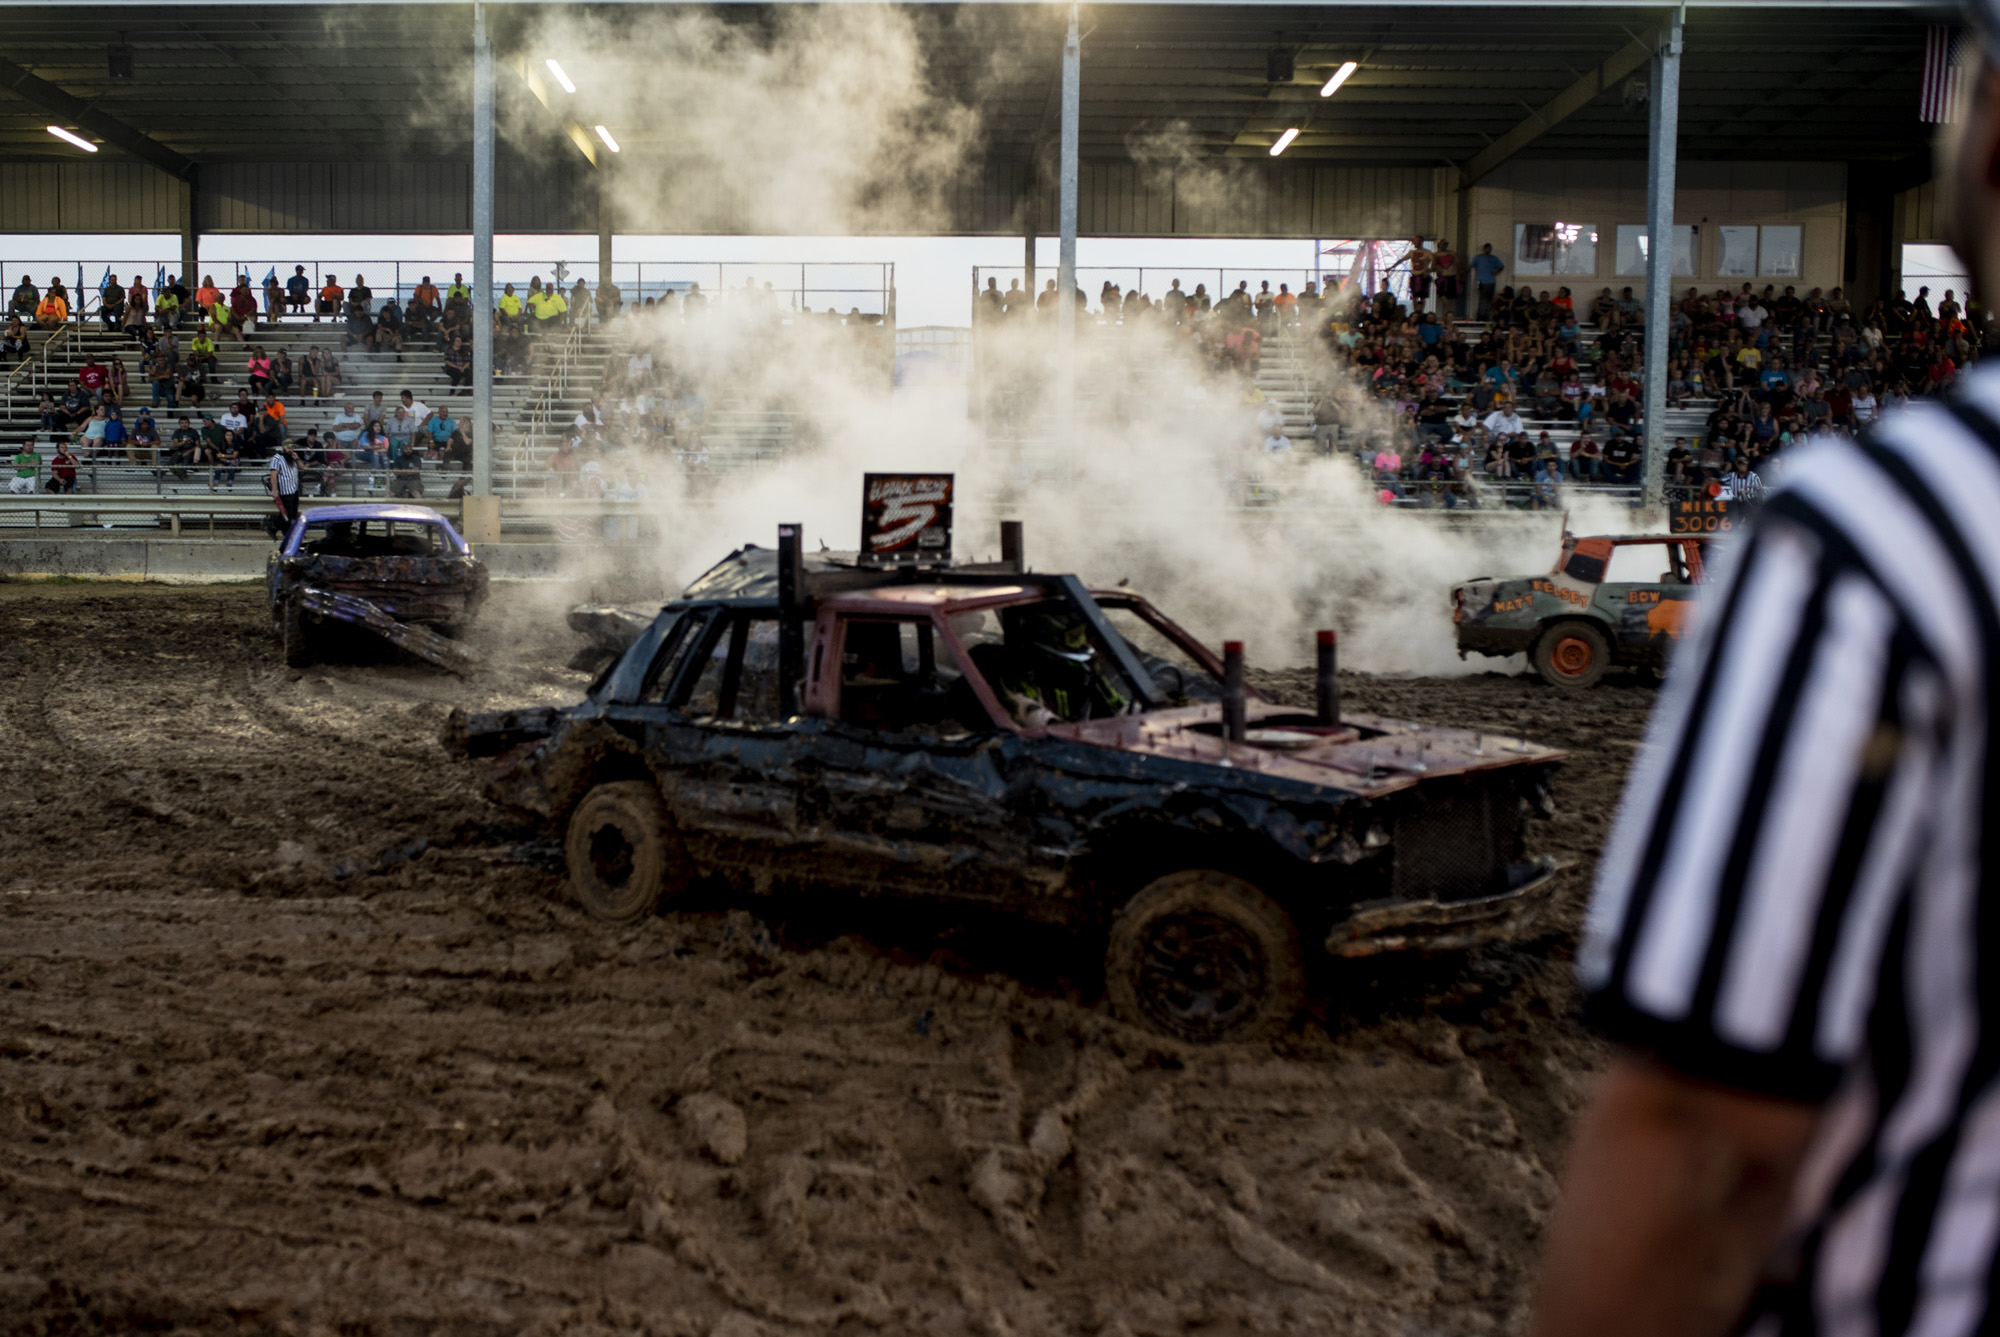  A demolition derby at the Fayetteville County Fair.  